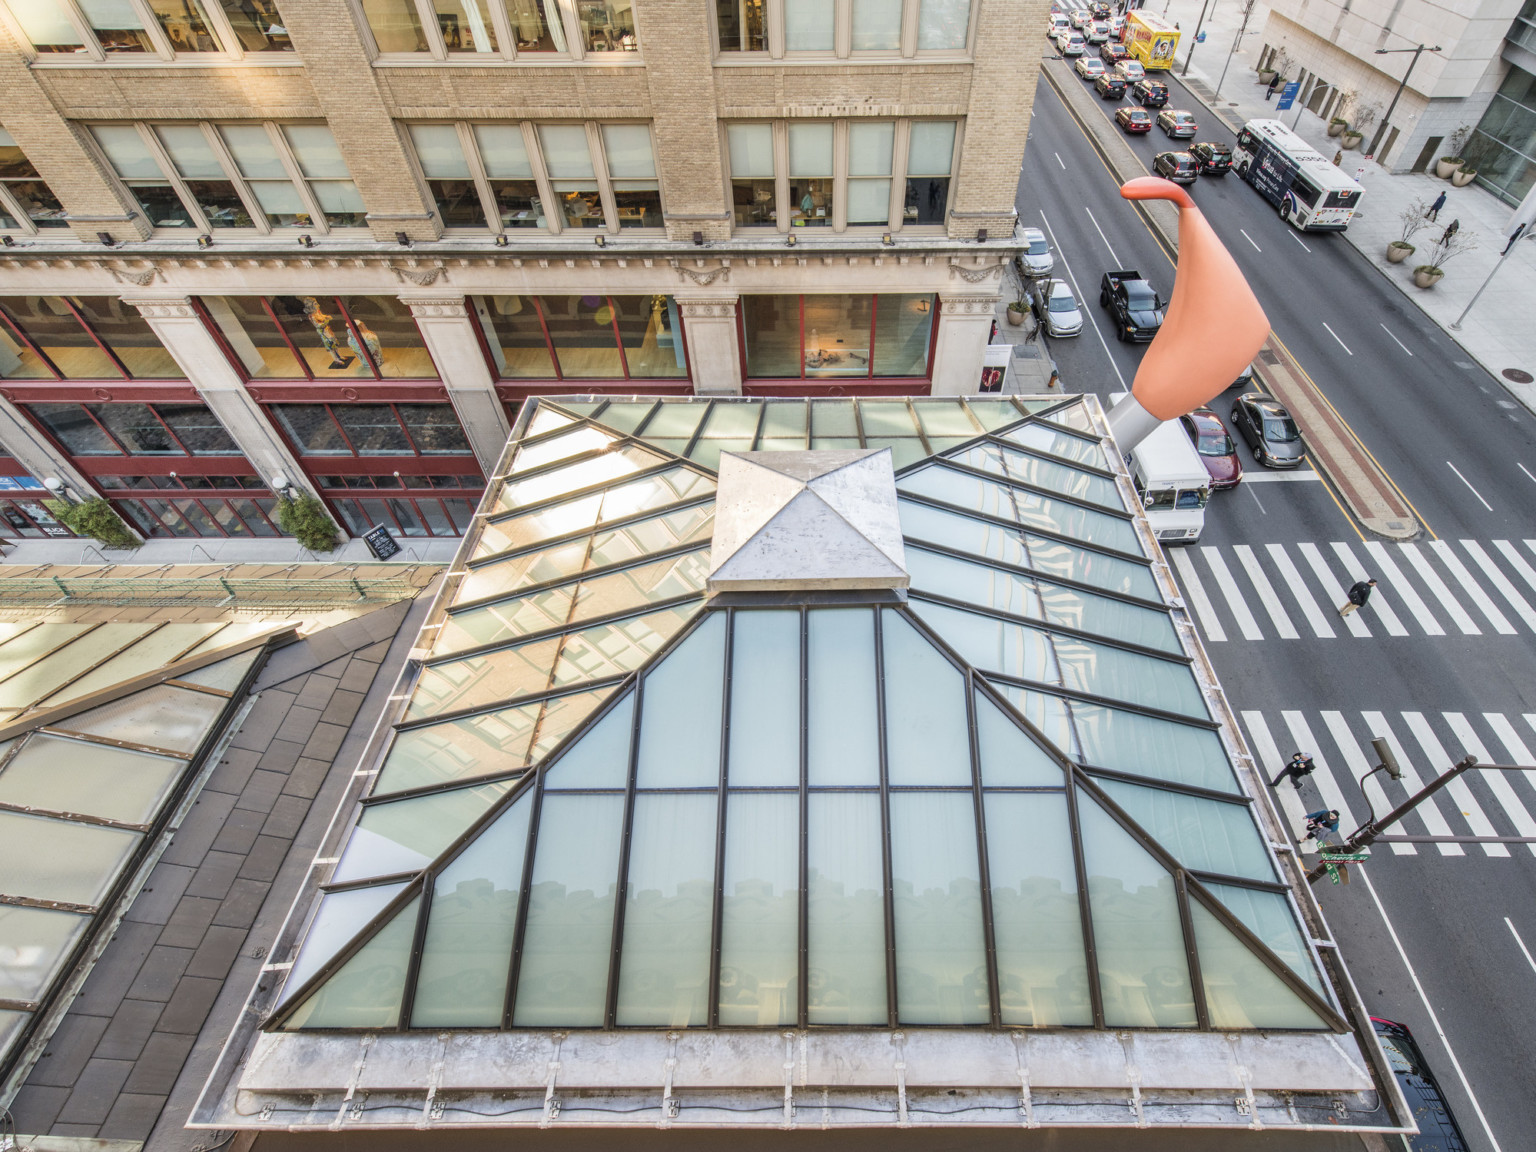 Pyramid shaped skylight seen from above, triangular sections are divided with contrasting trim, a metal pyramid sits on top